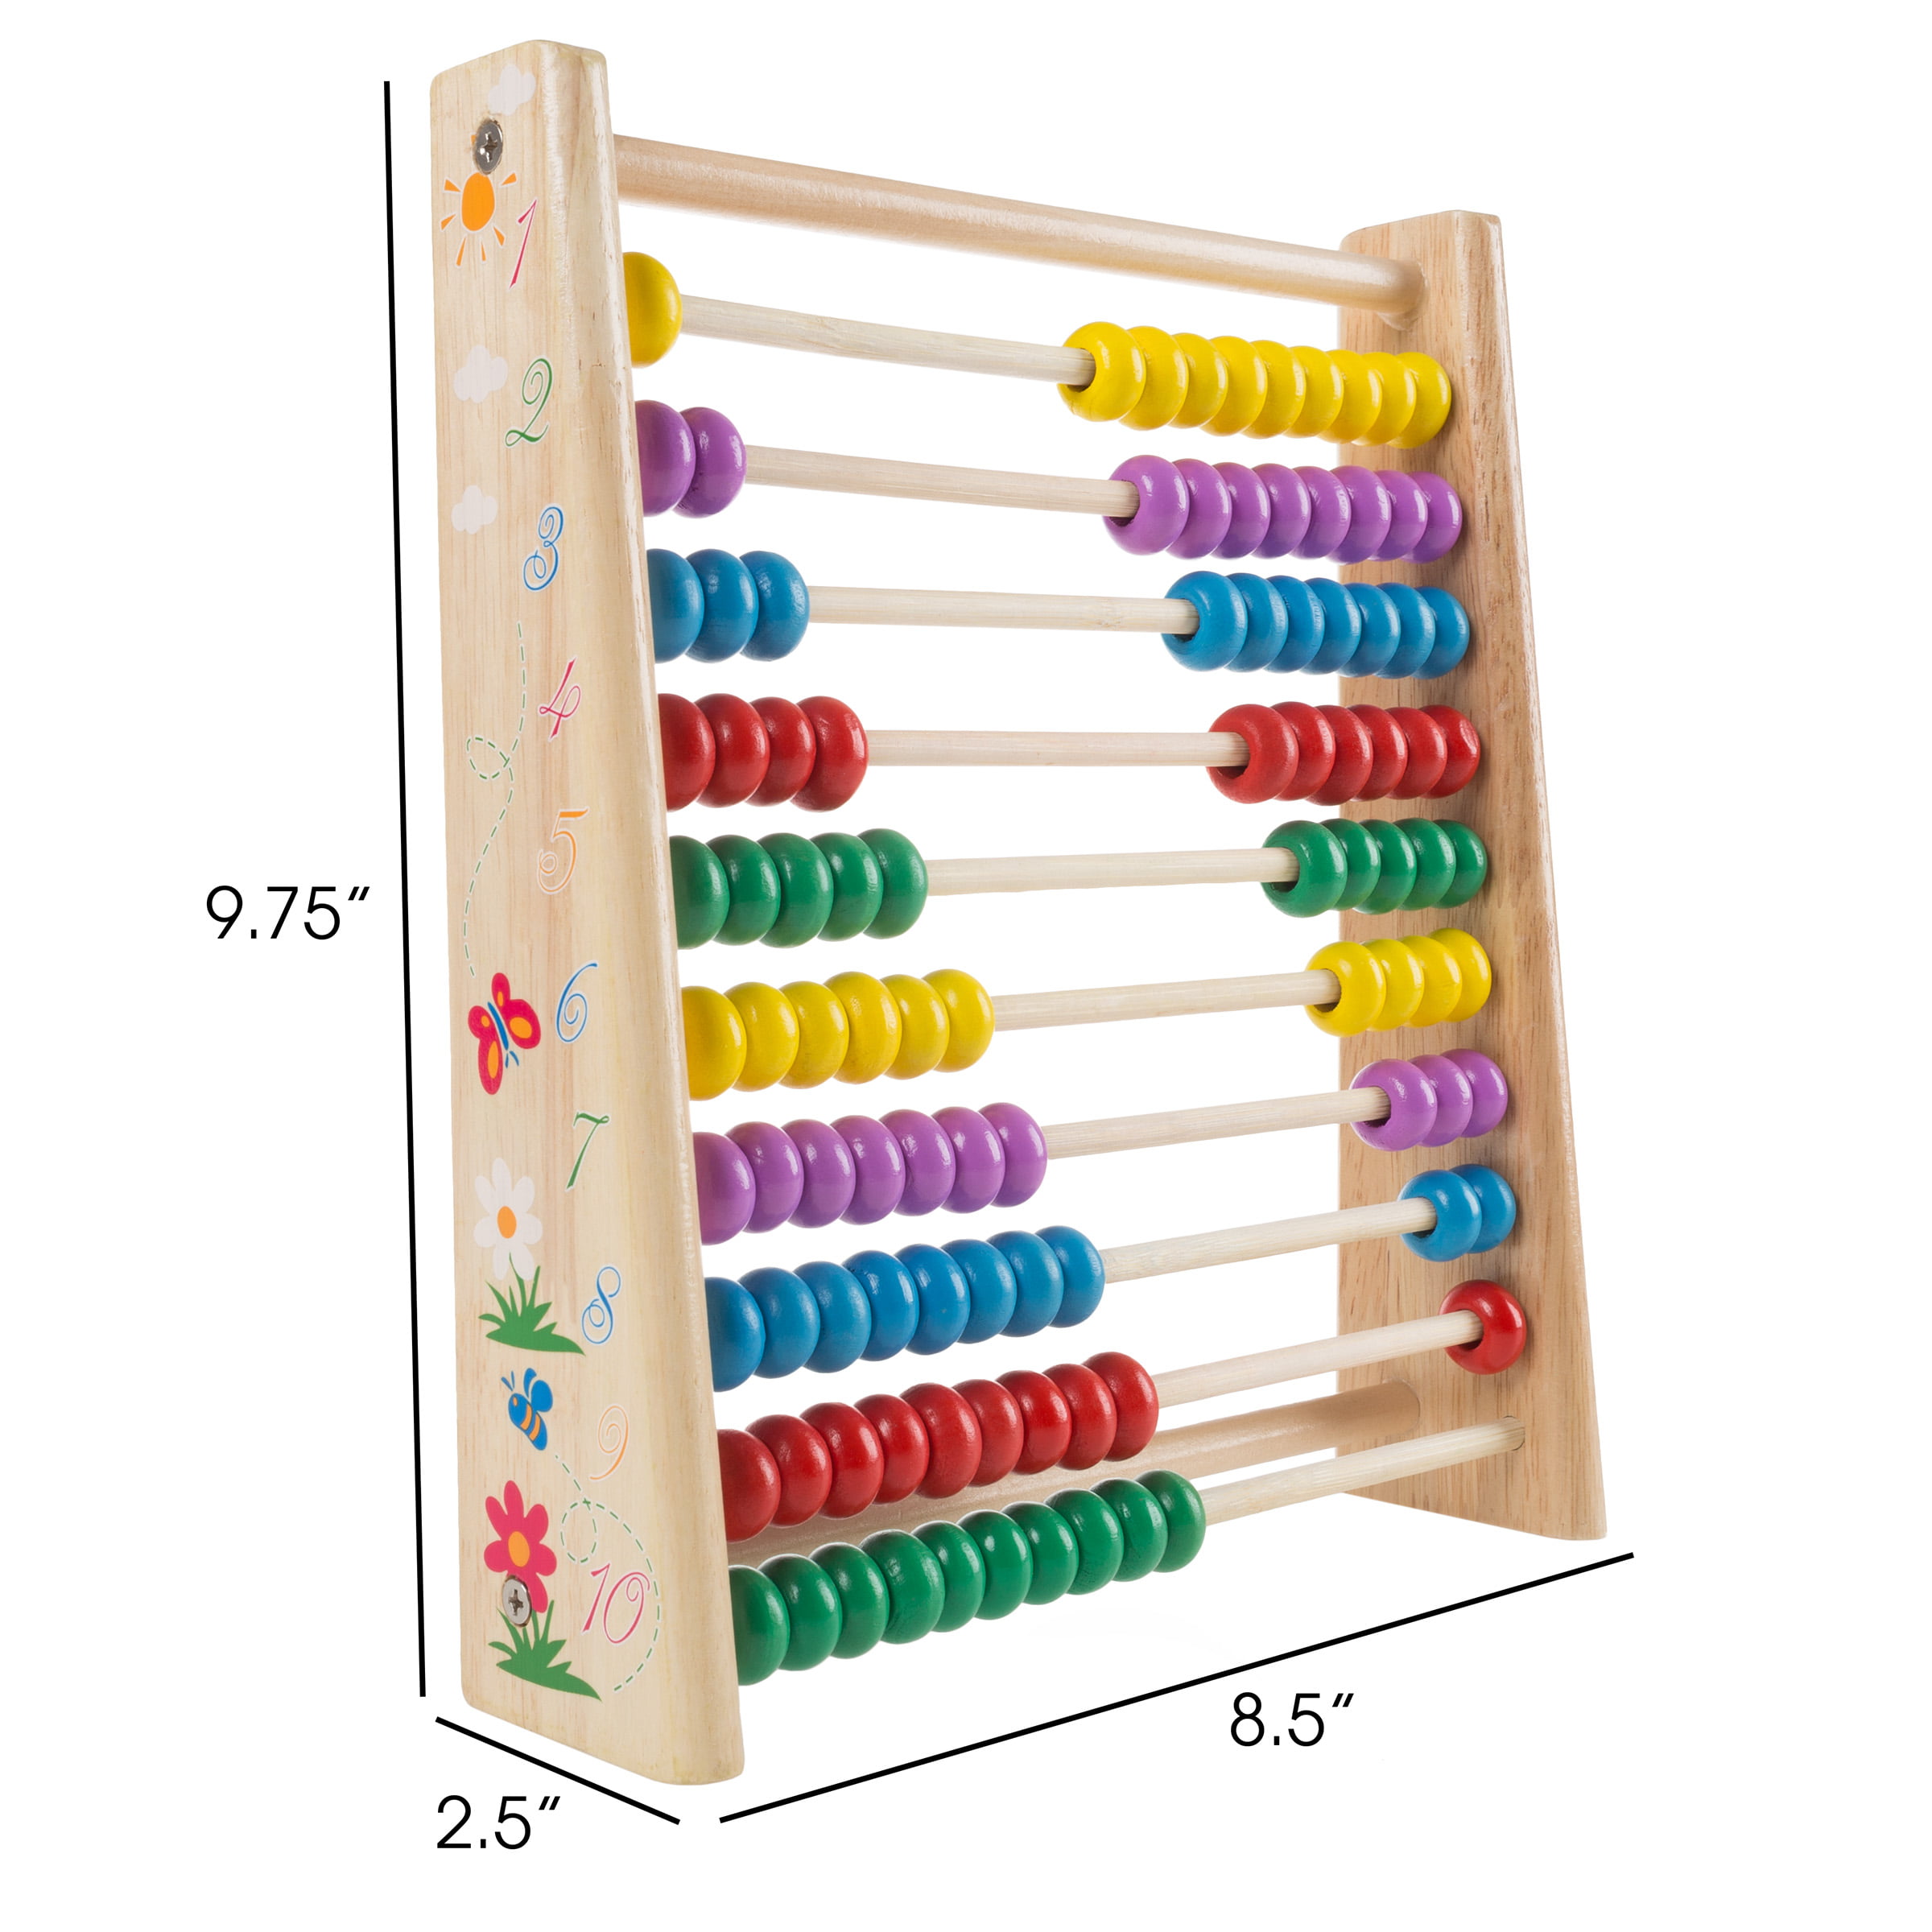 Kids Wooden Math Counting Blocks Sticks Learn Numbers Abacus Educational Toy SU 